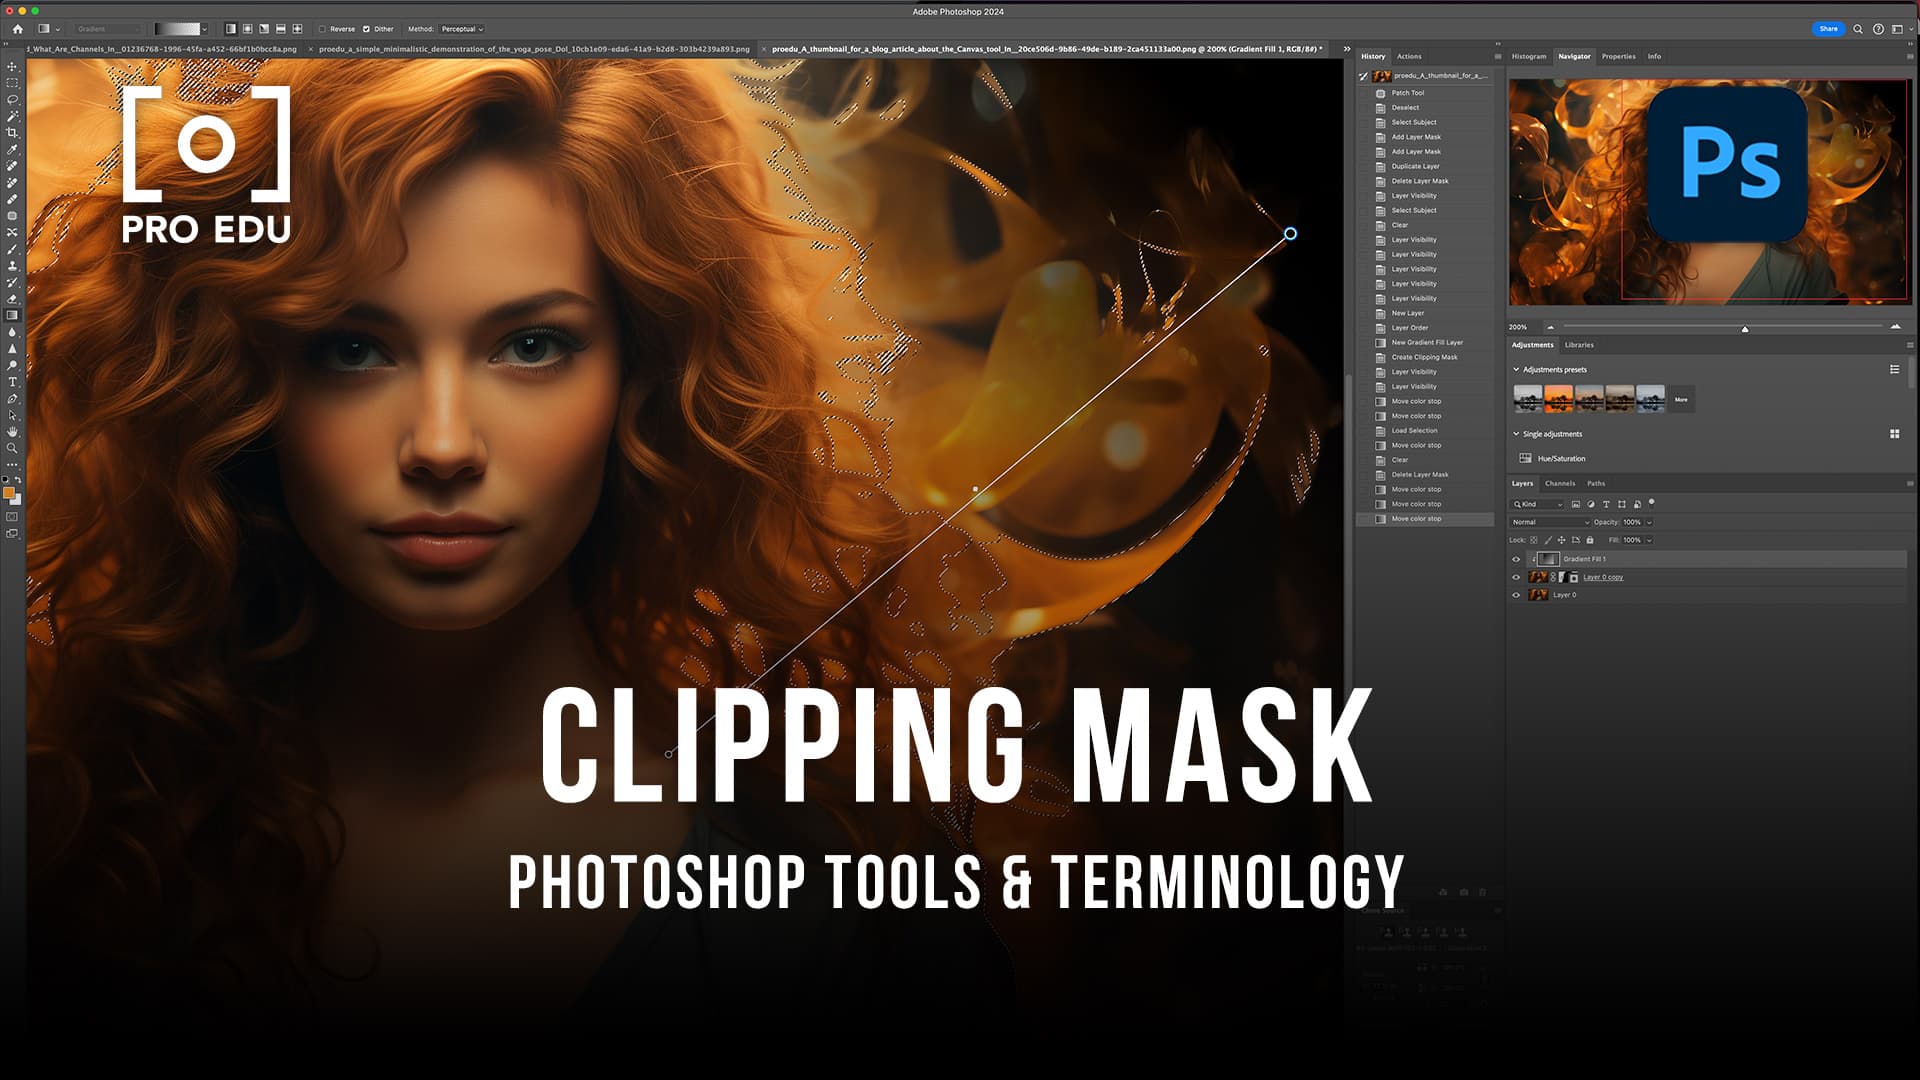 Clipping Mask in Photoshop - PRO EDU Guide